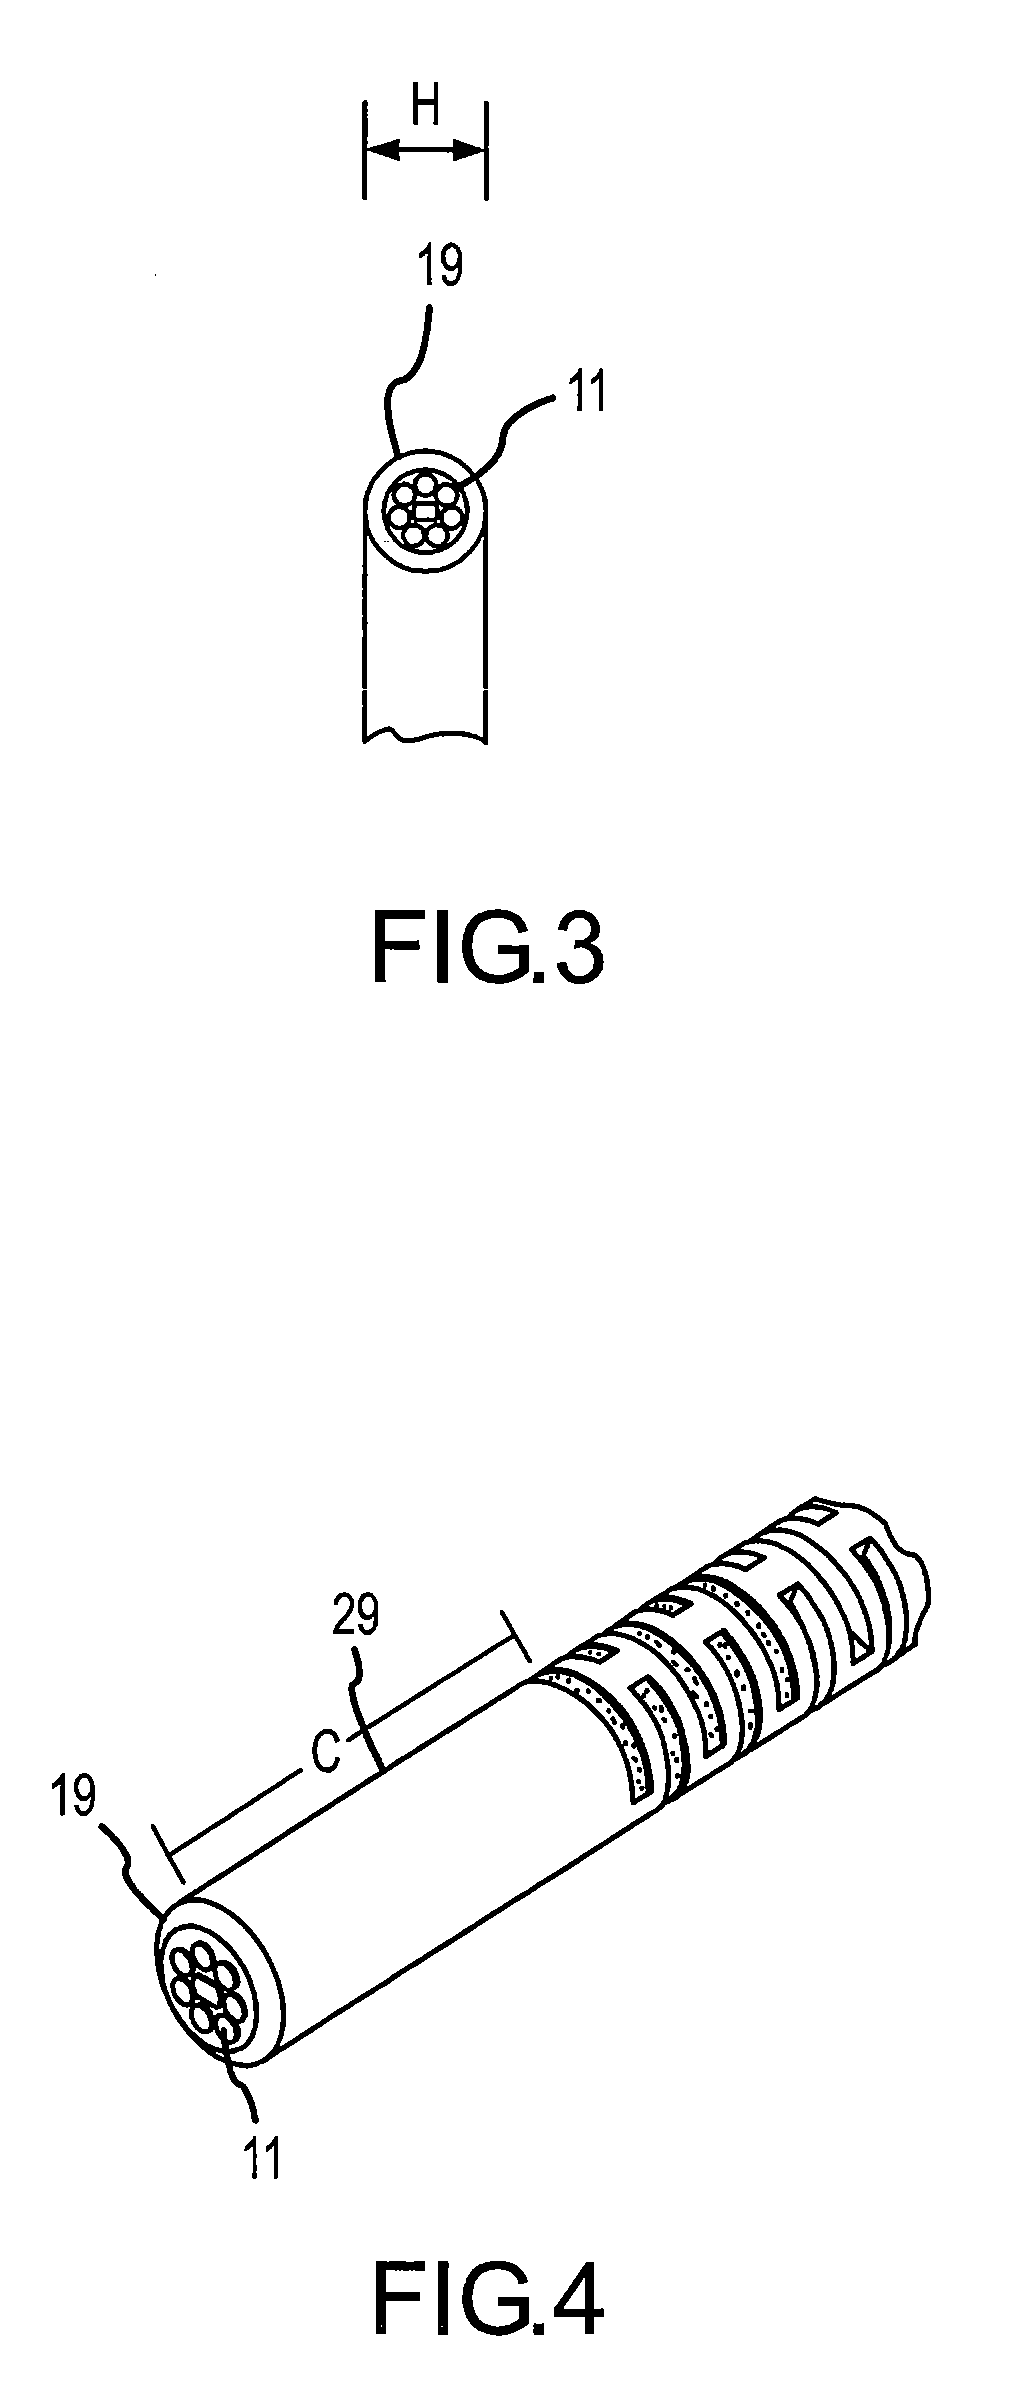 Laser-assisted guidewire having a variable stiffness shaft